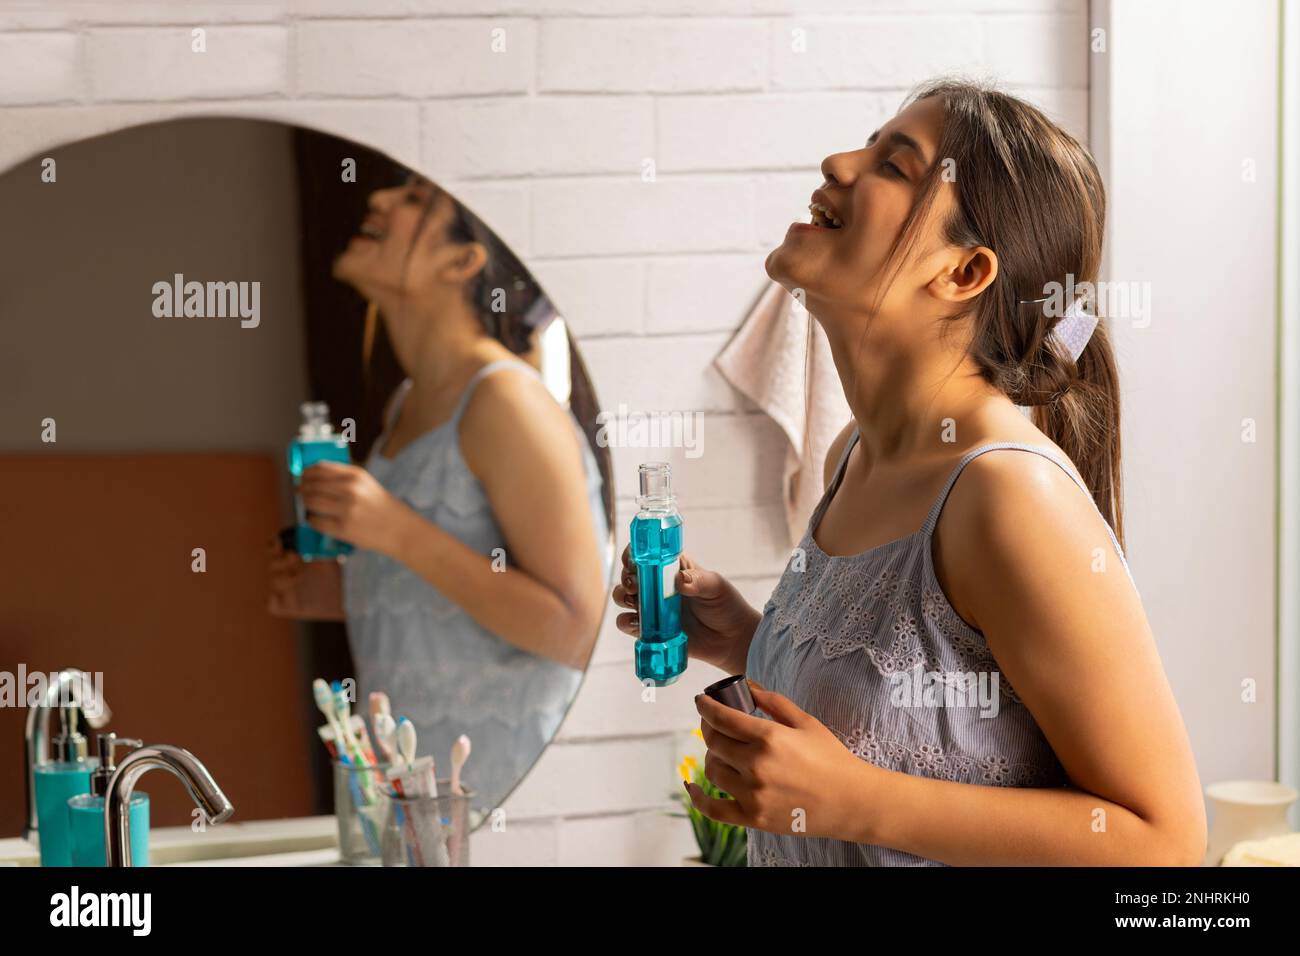 Woman gargling with mouthwash in bathroom Stock Photo